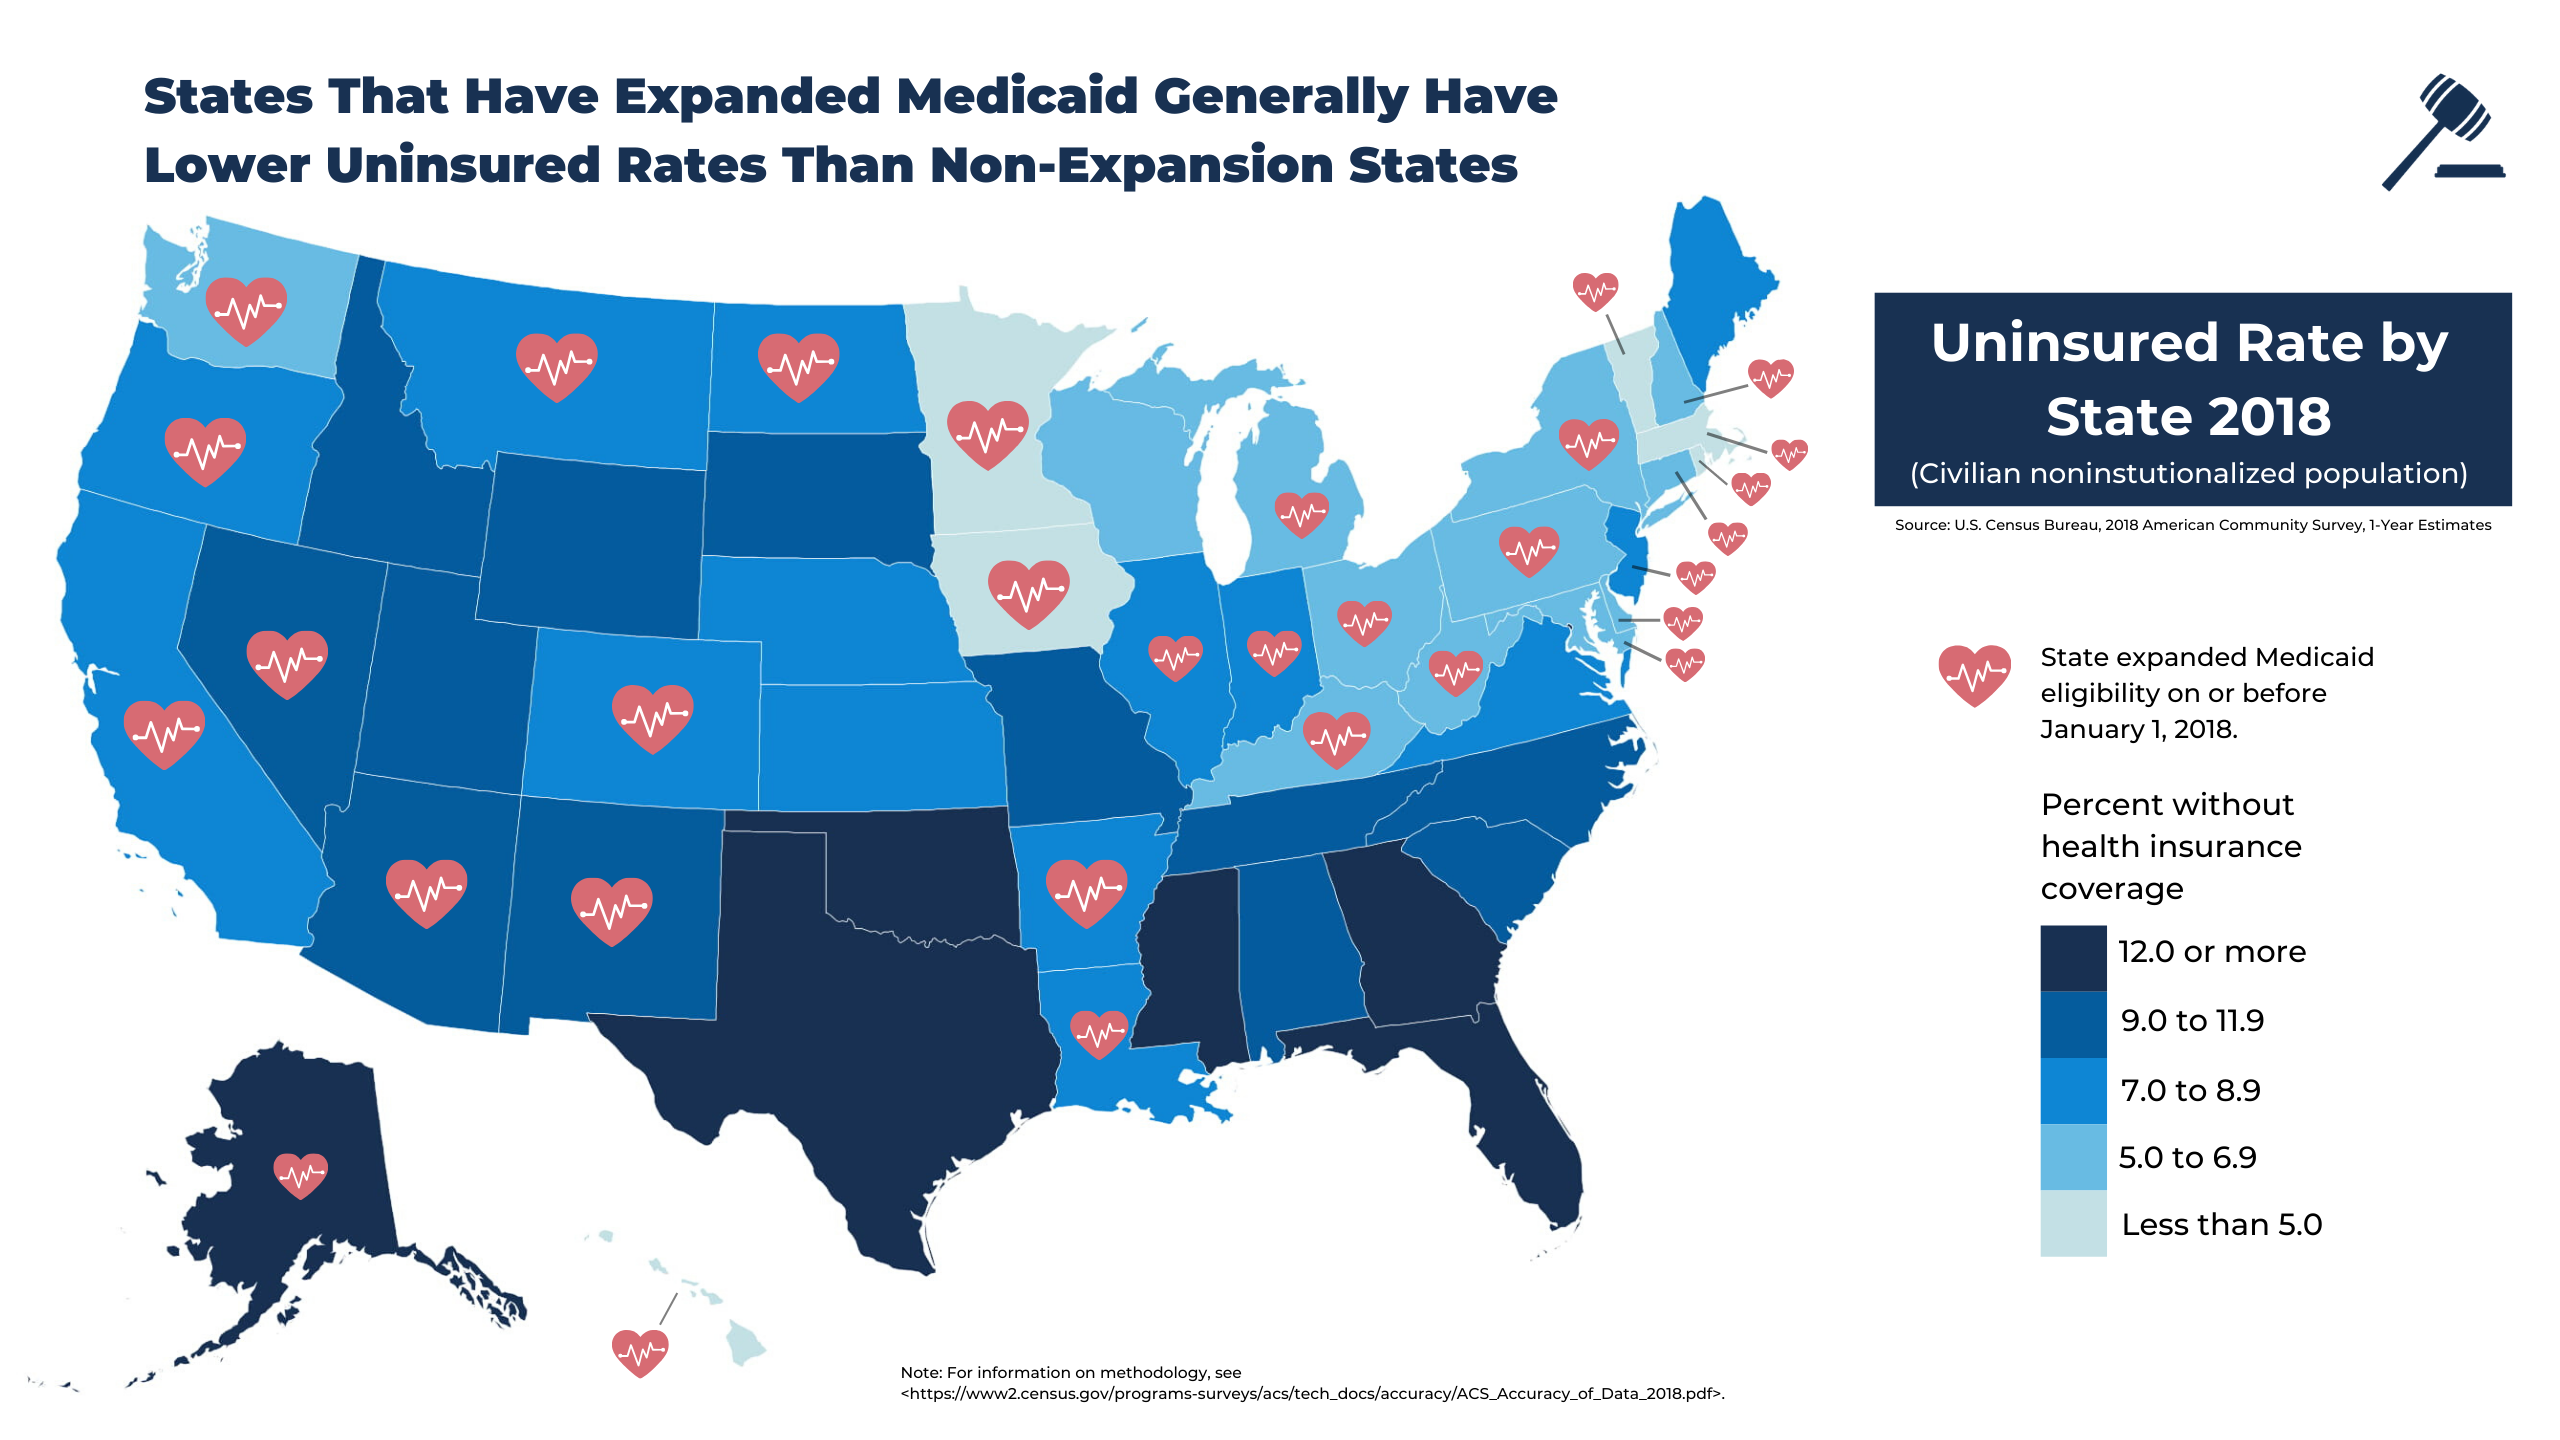 States that have expanded Medicaid have lower uninsured rates 